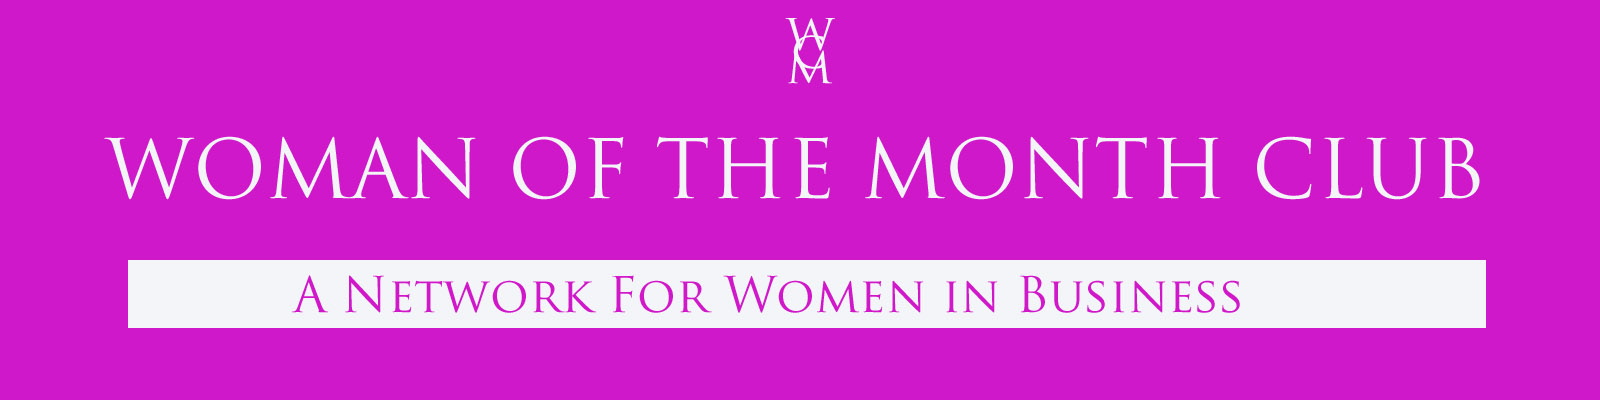 Woman Of The Month Club